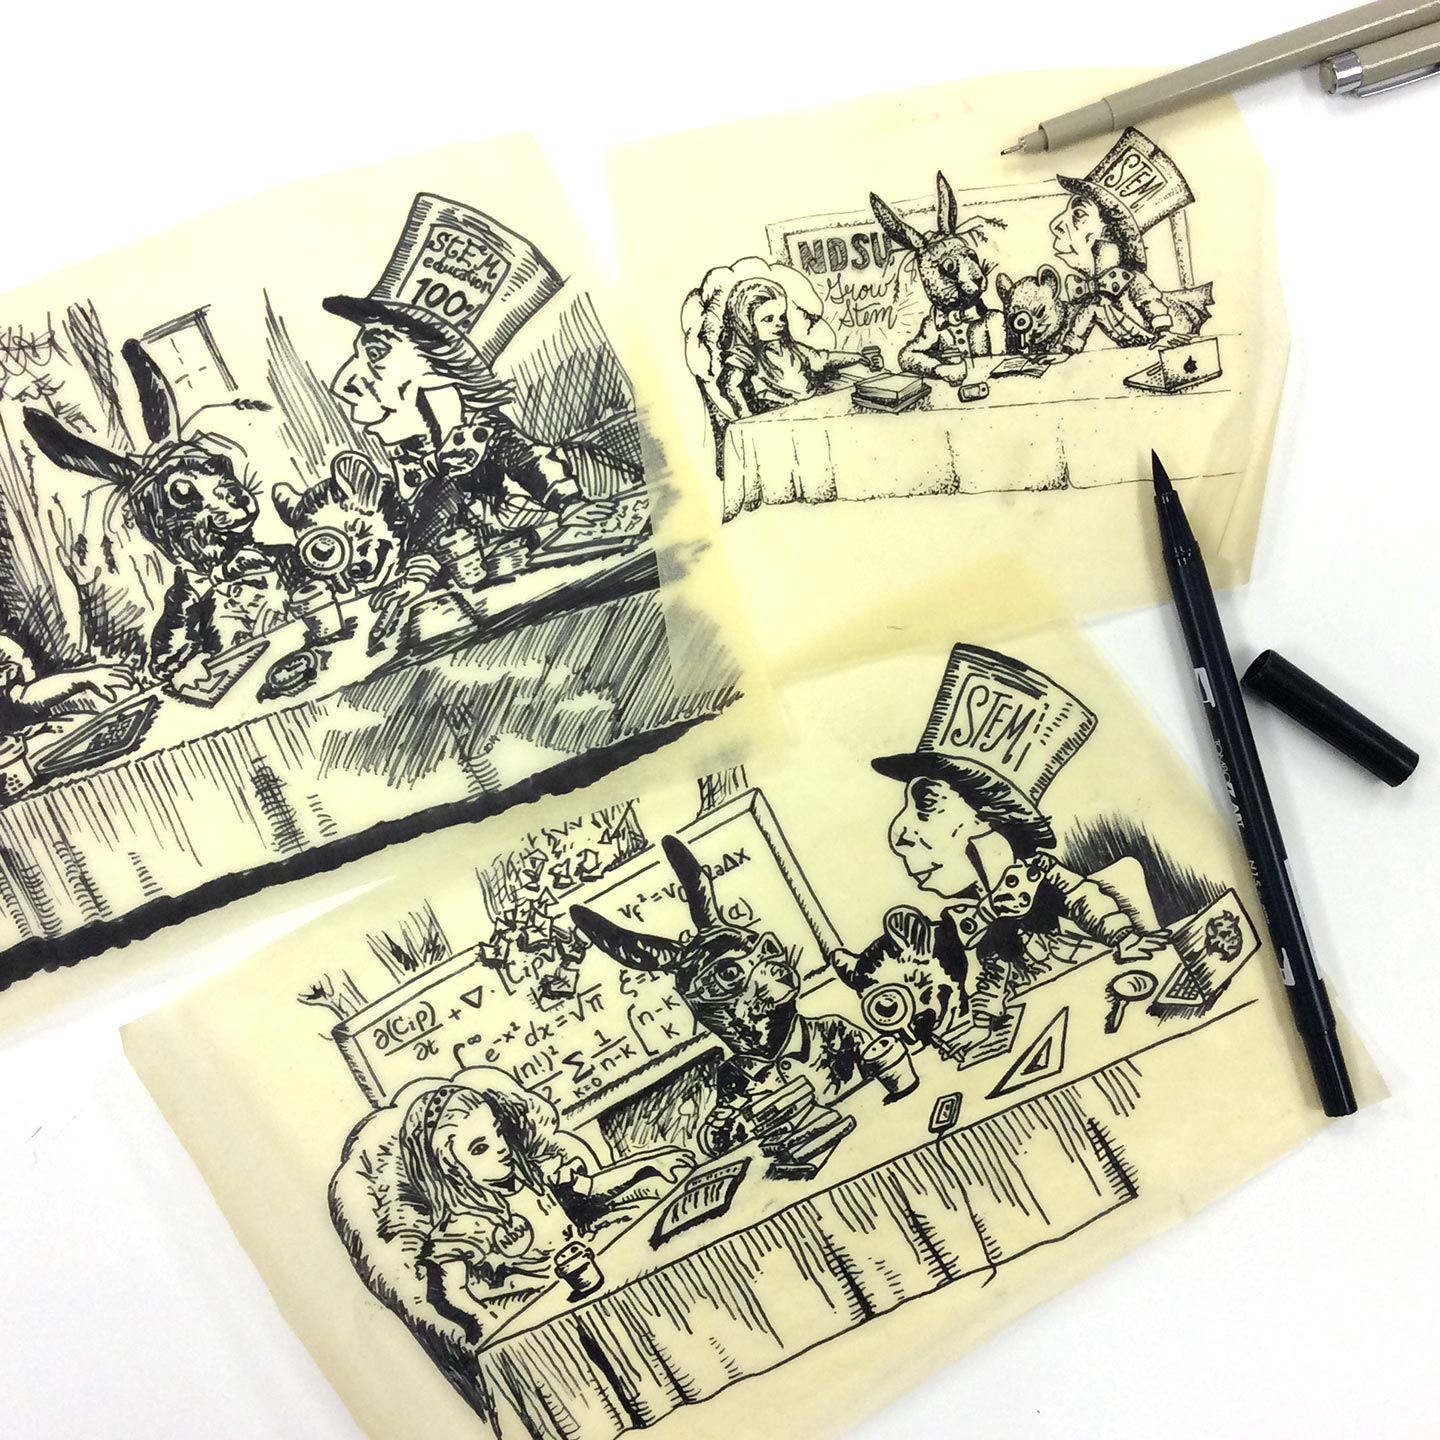 Sheets of tracing paper with black sketches from Alice and Wonderland on them next to a black pen on a white surface